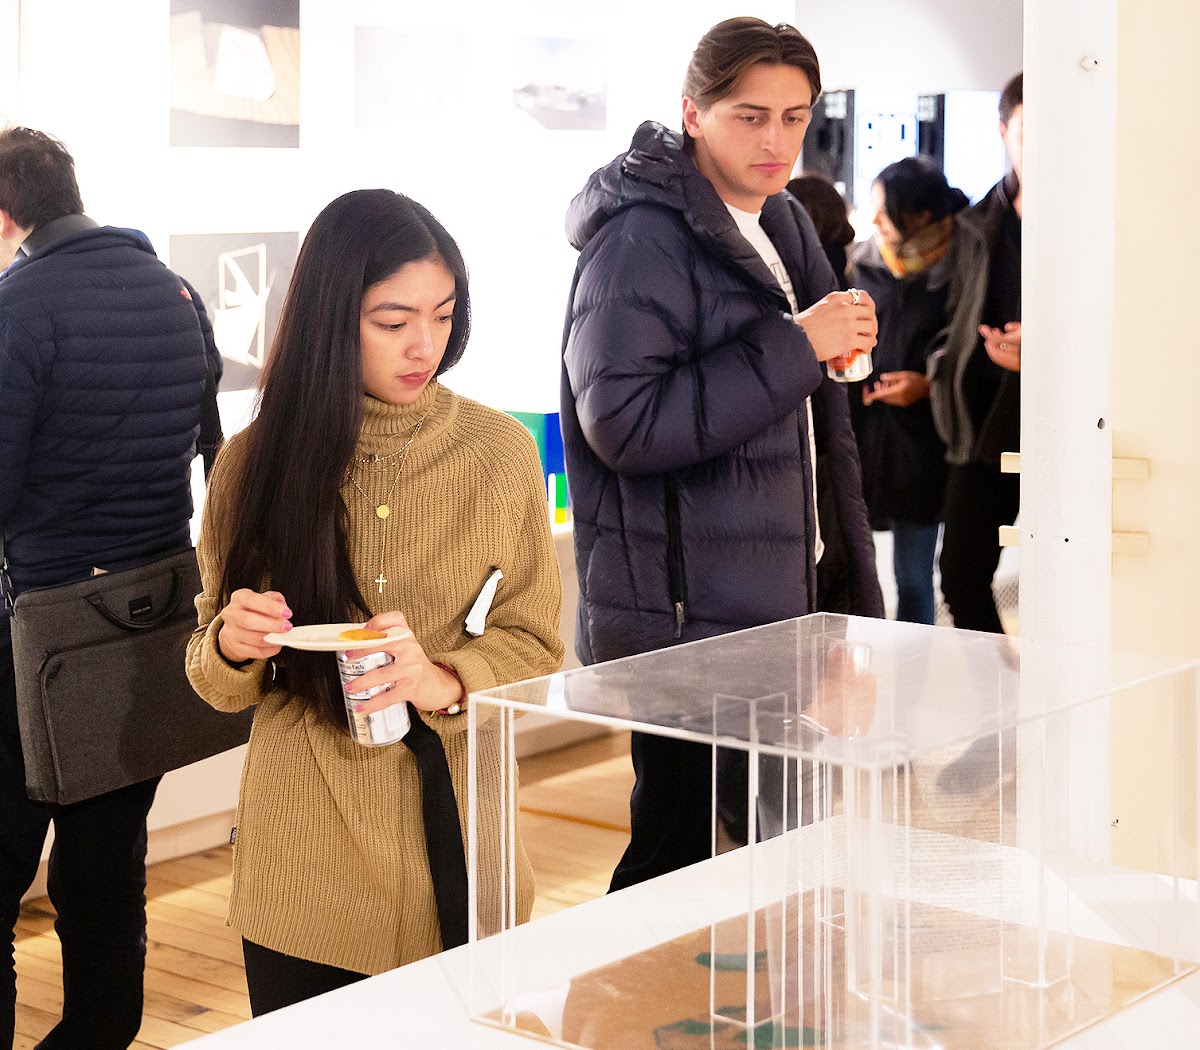 Students viewing architecture exhibition